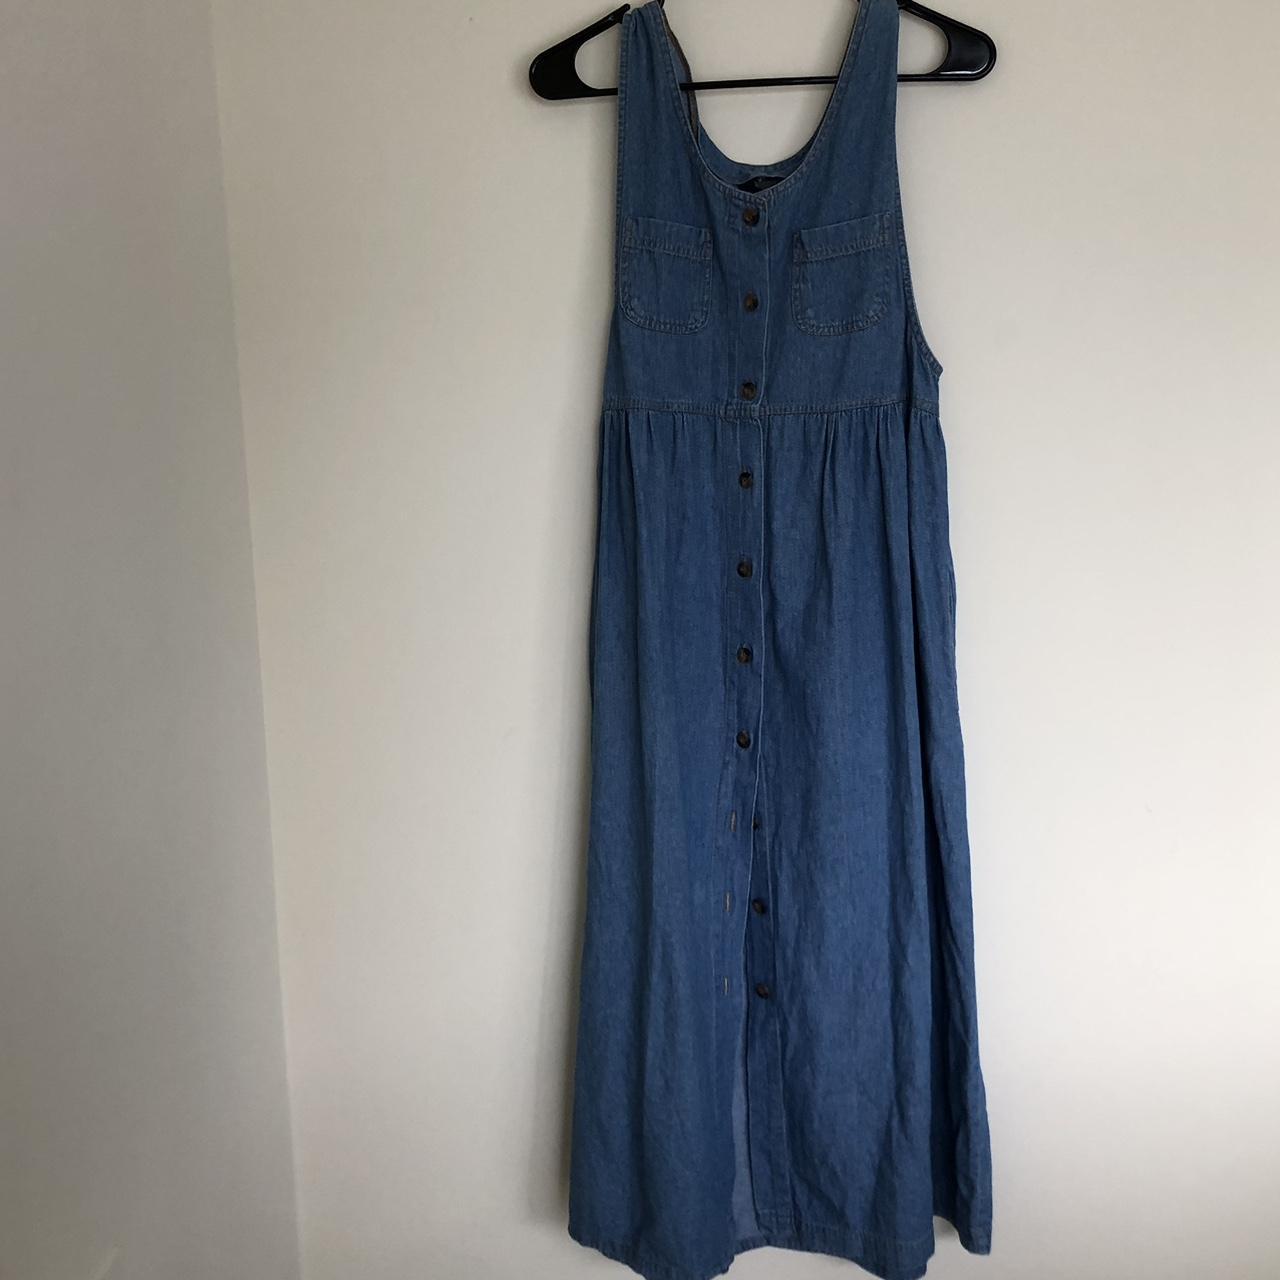 Size small adorable denim dress No stains tears or... - Depop